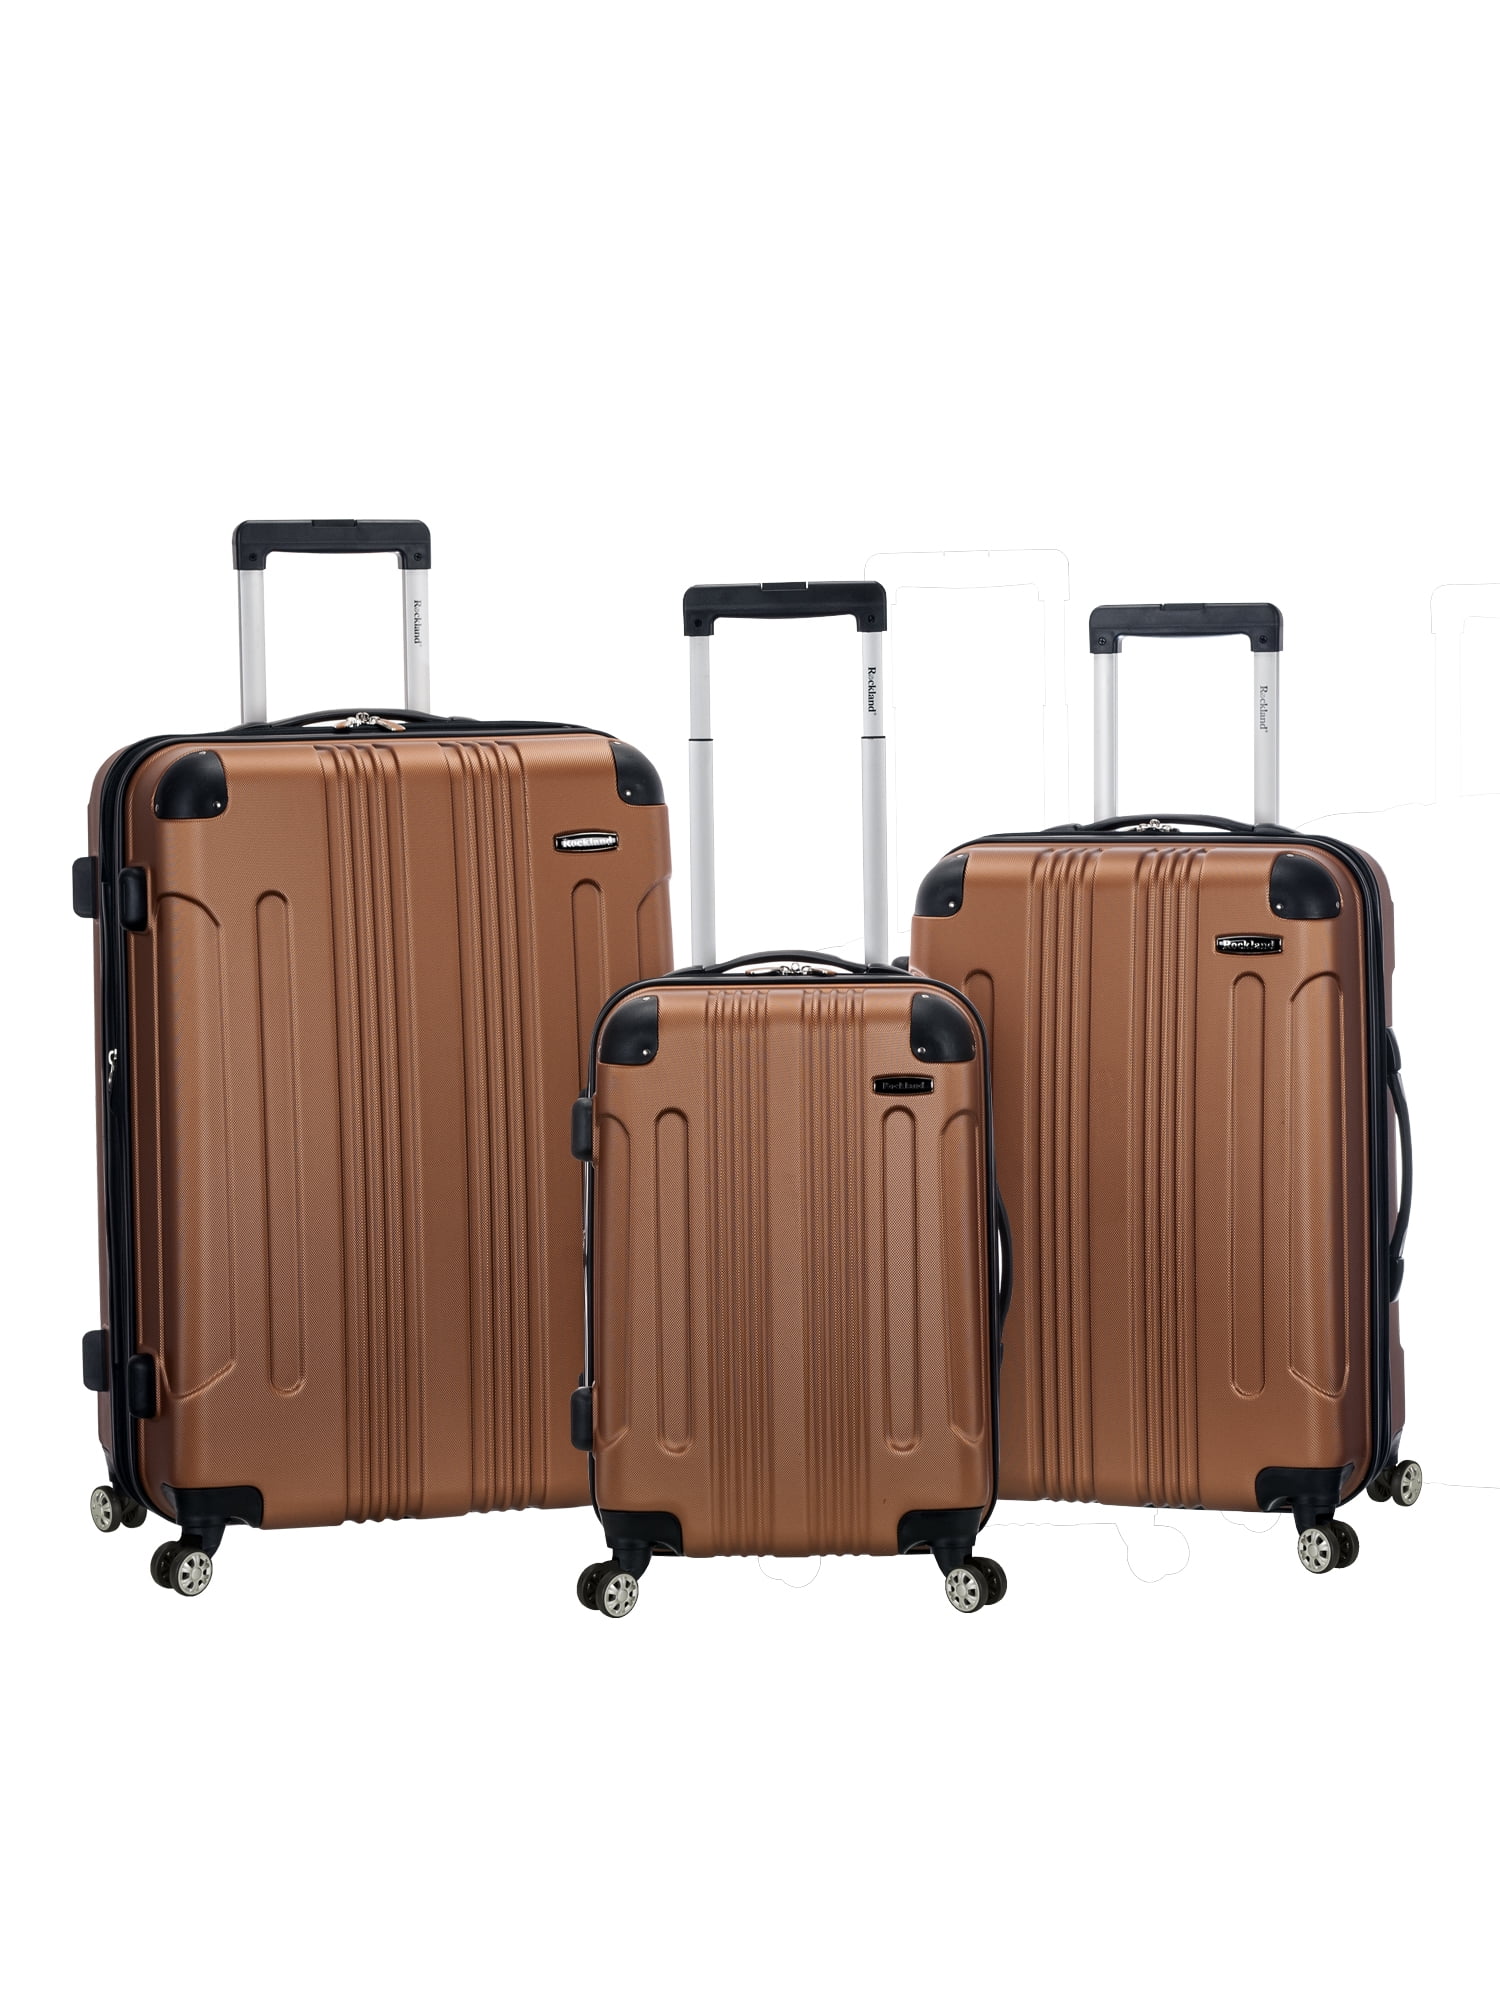 Rockland Sonic 3pc ABS Upright Hardside Carry On Luggage Set - Brown